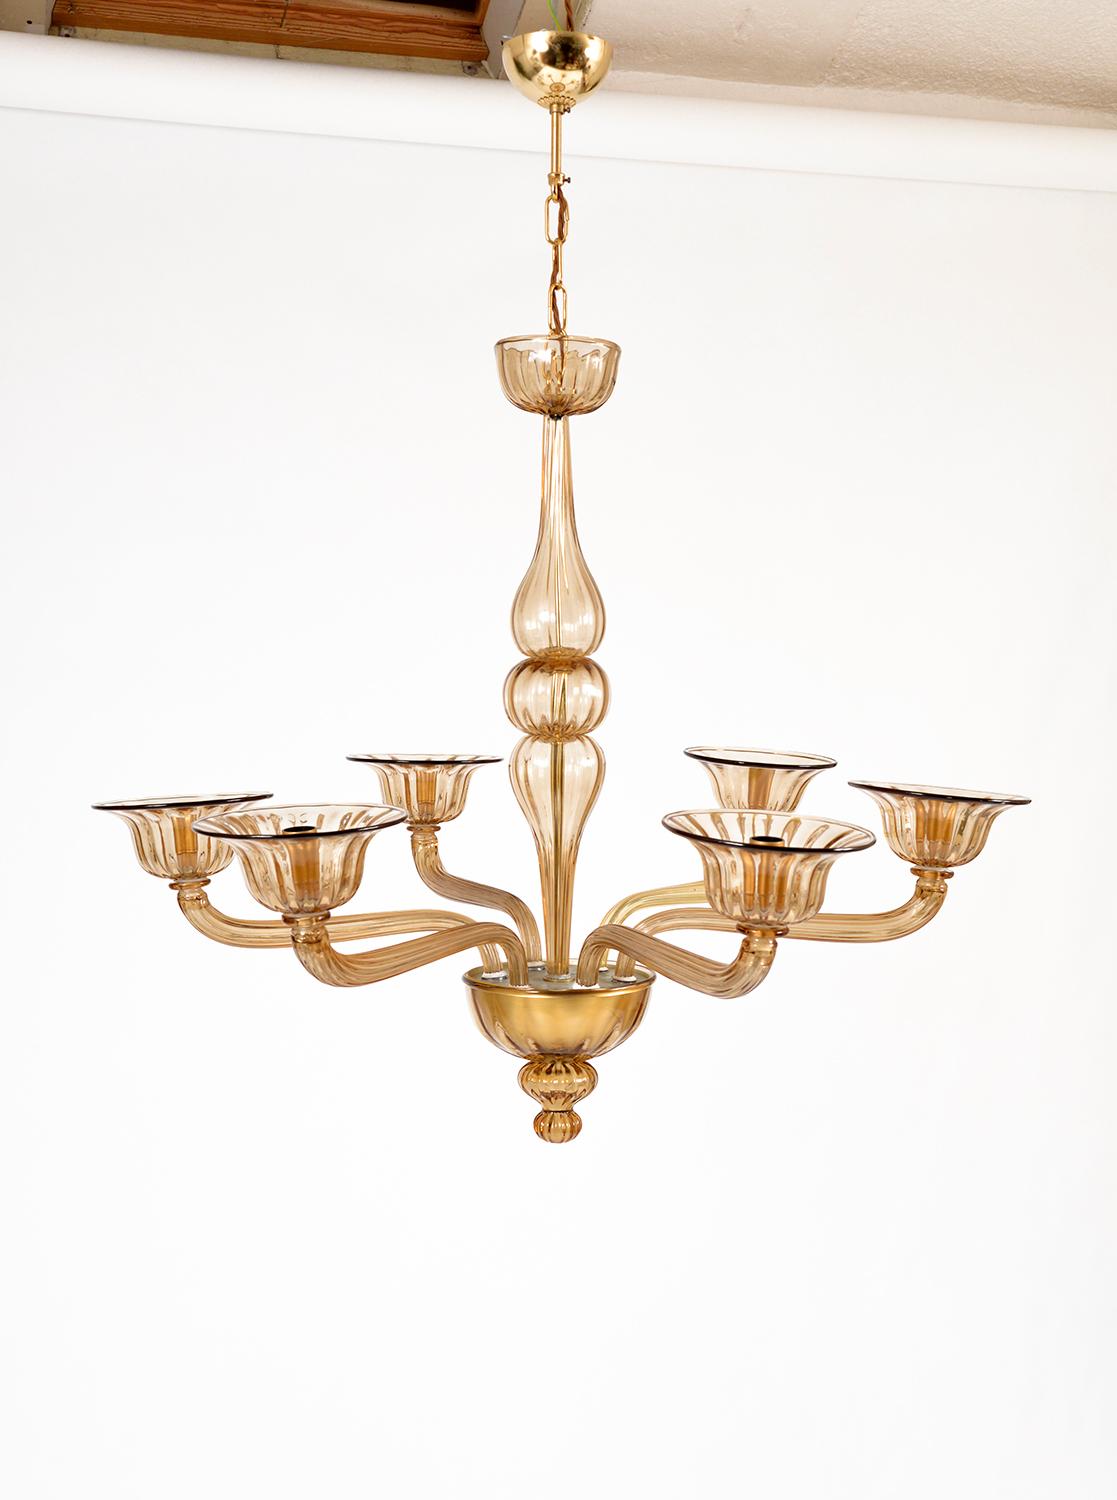 A classic six-arm Venetian Murano chandelier in hand-blown amber coloured glass. The scroll arms with ribbed decoration, hold six flared bobeche where the light bulbs are nested, culminating in a bowl-shaped gold base with a teardrop finial.
This